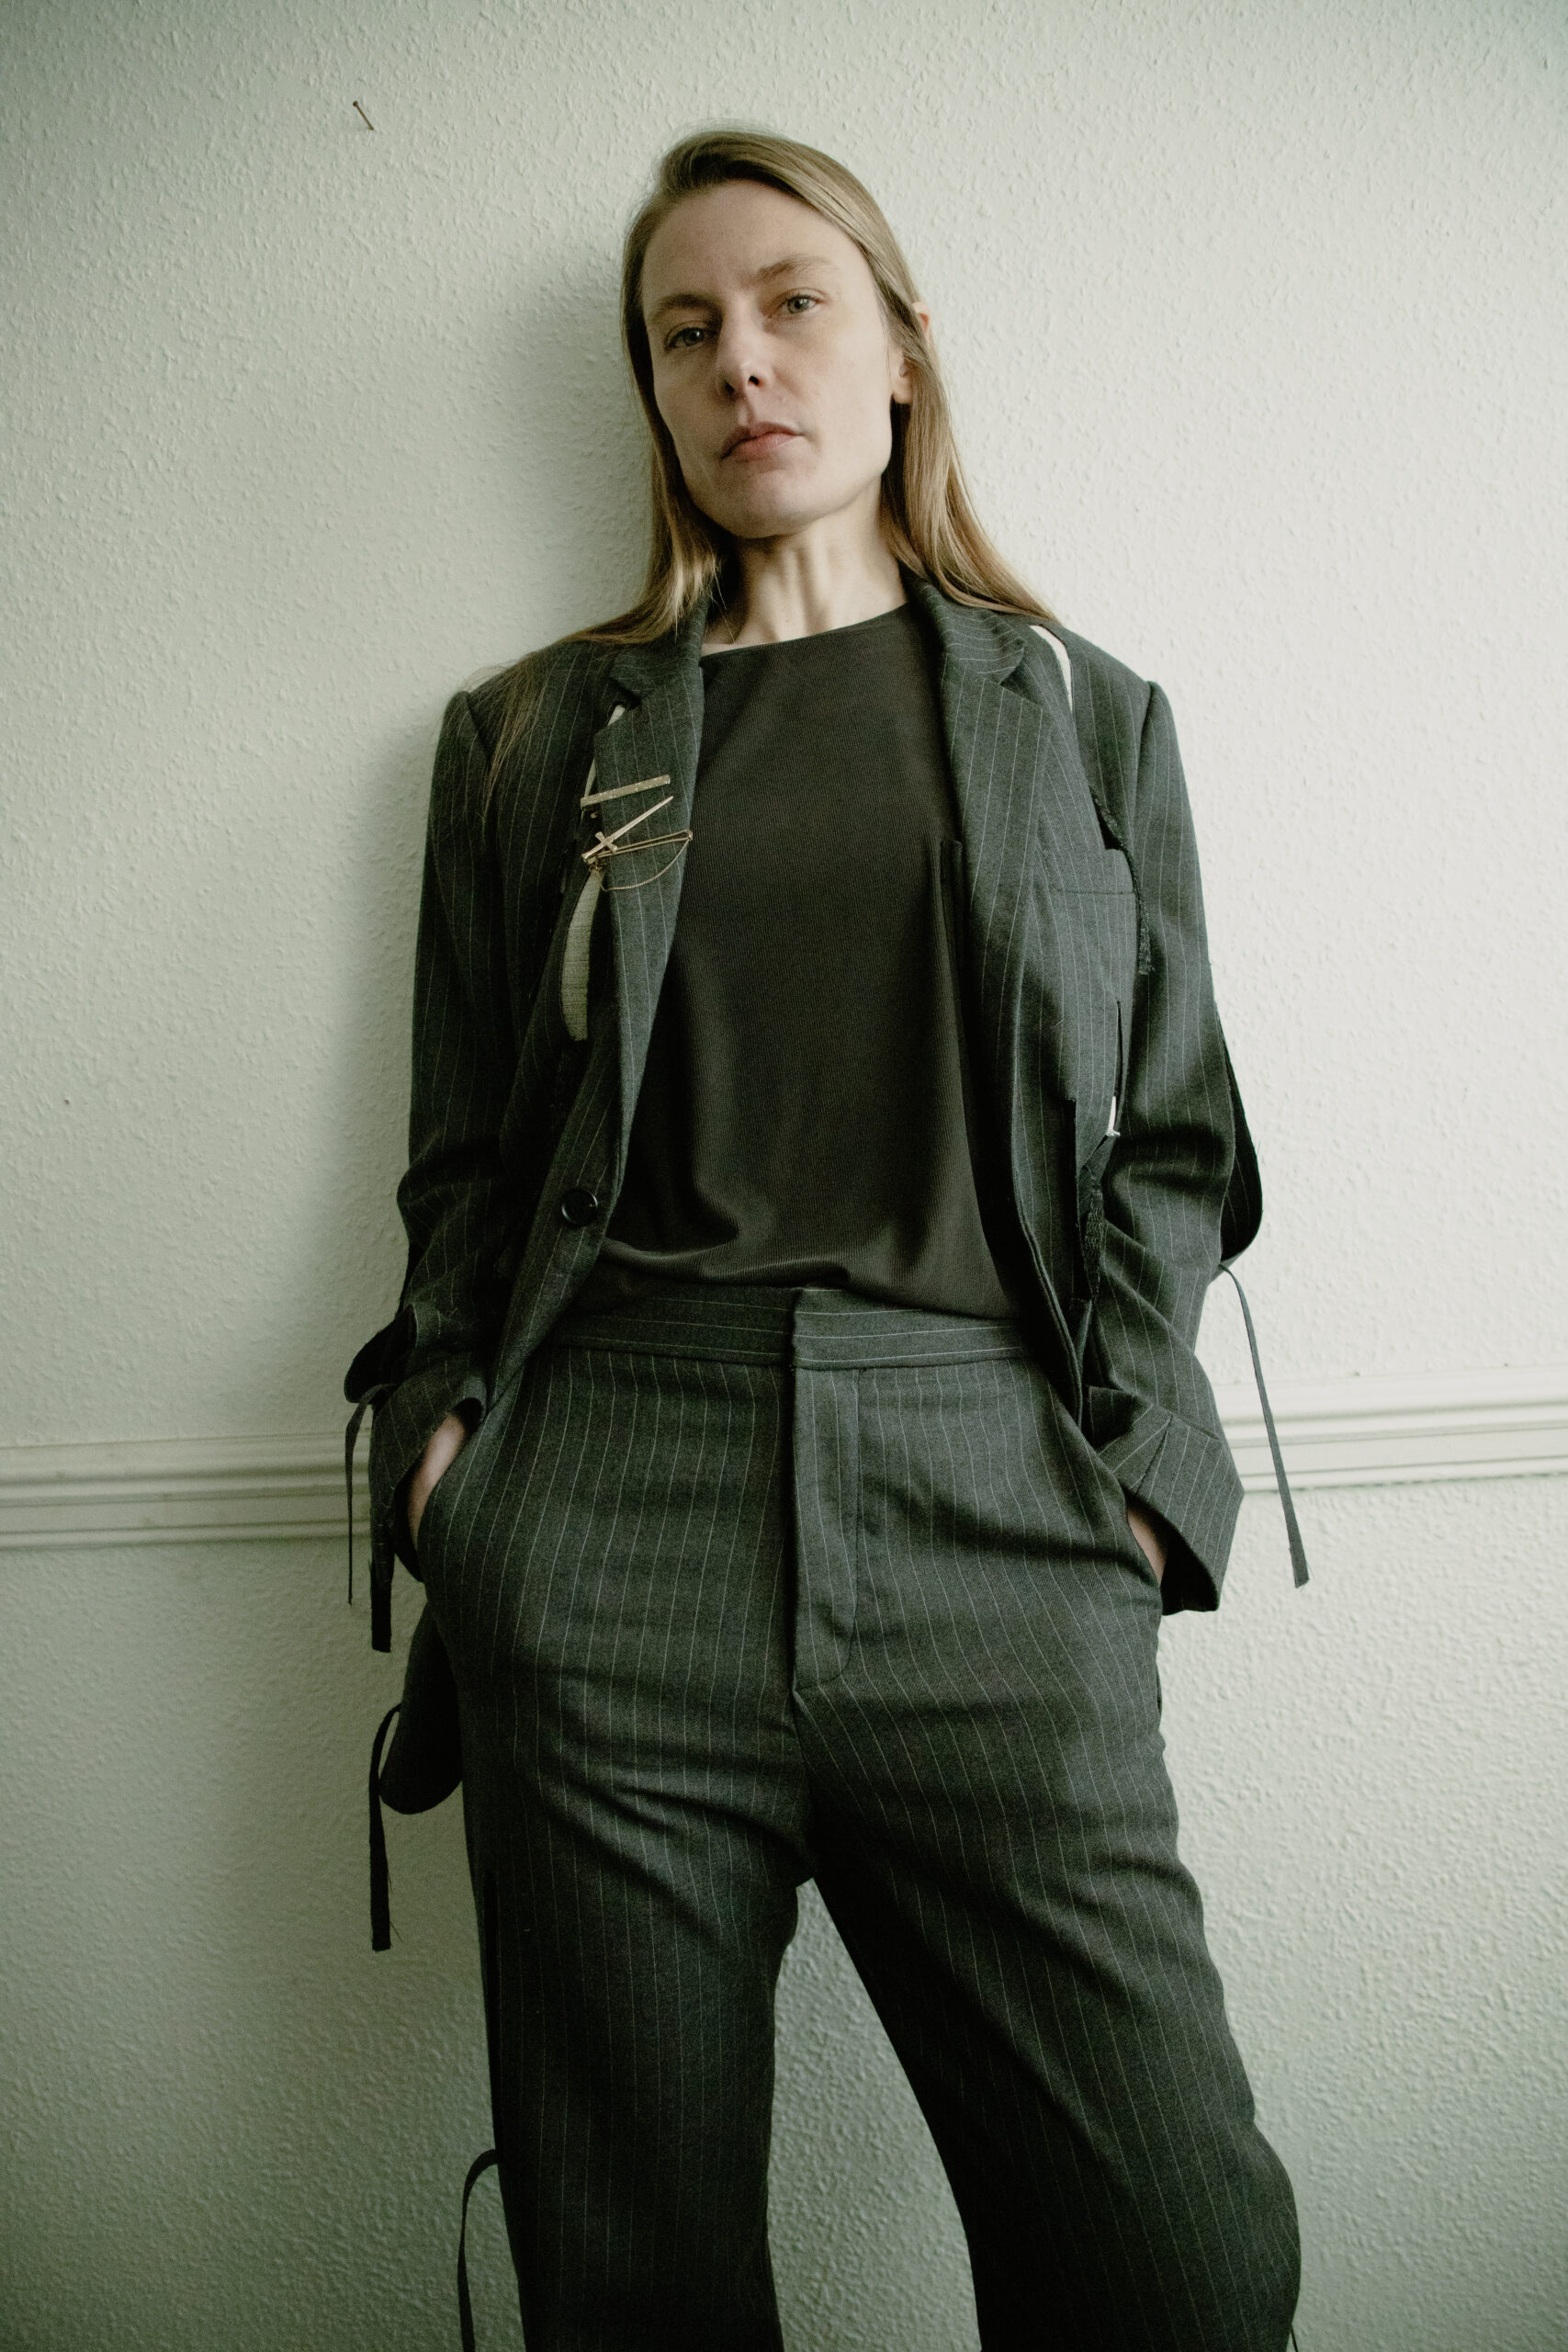 Tailored womens suit cool